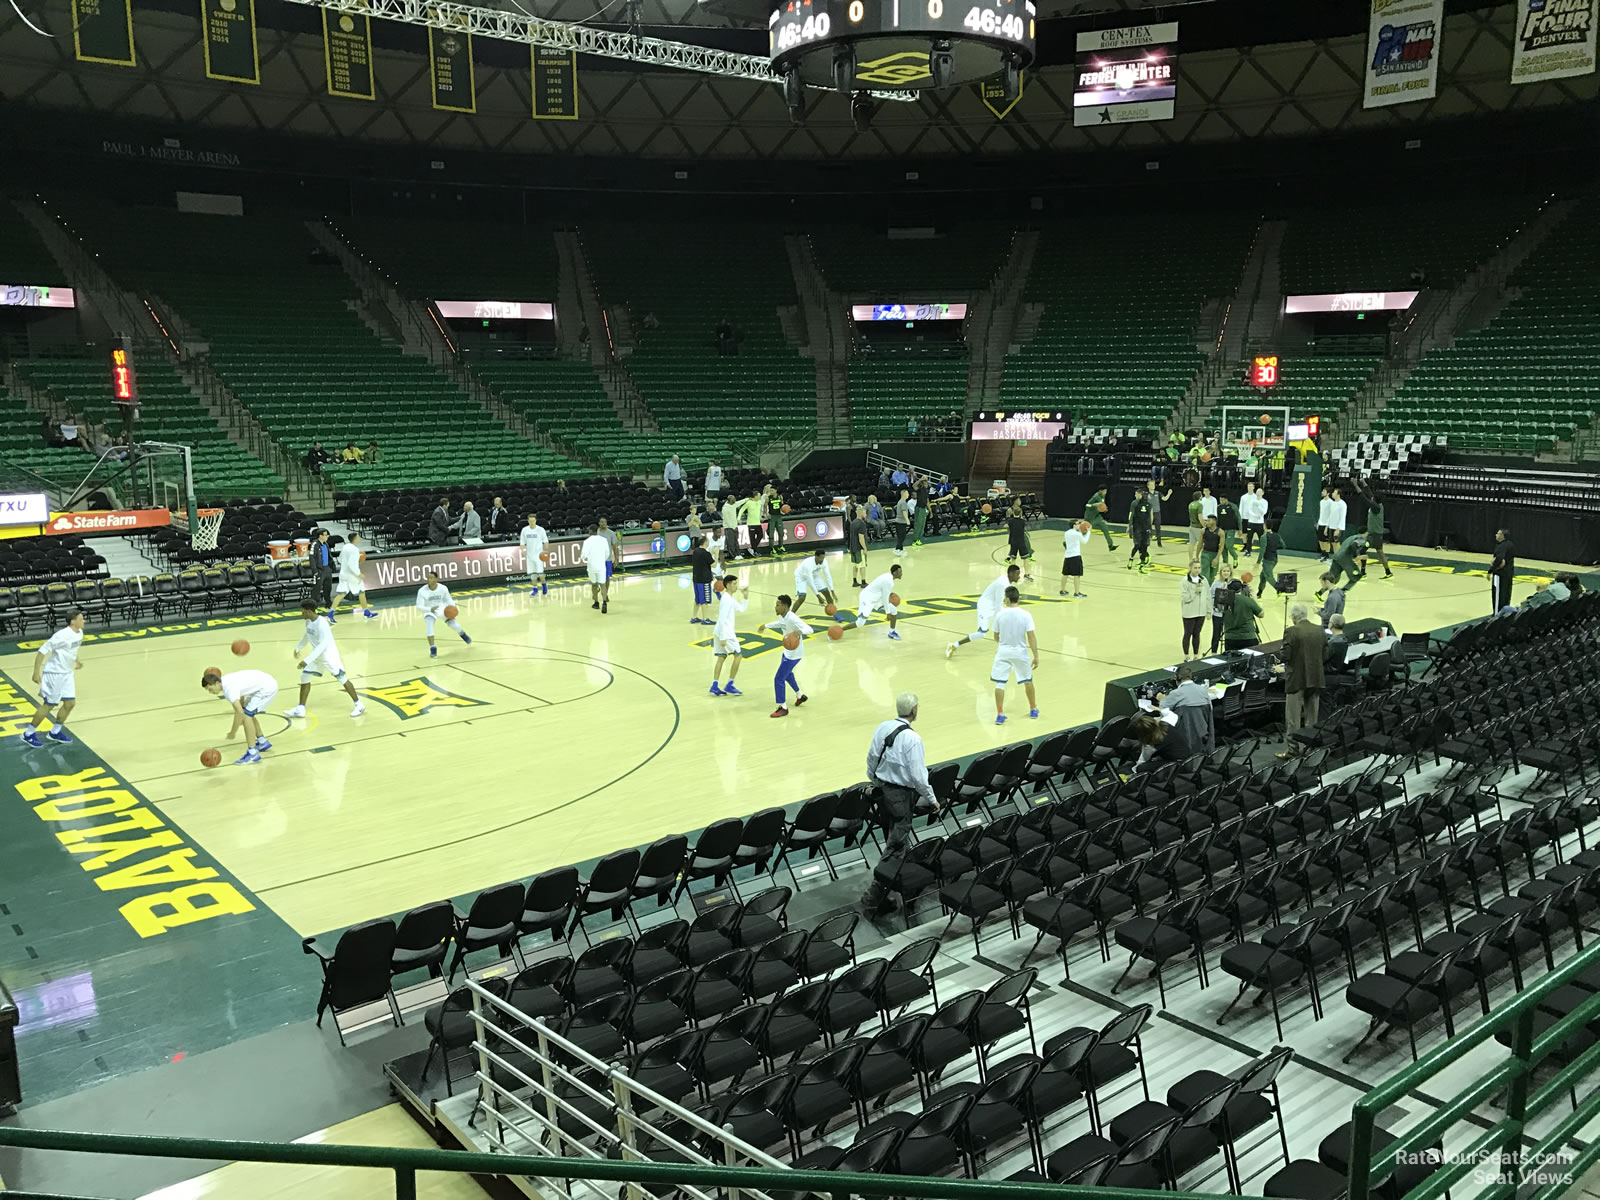 section 104, row 10 seat view  - ferrell center